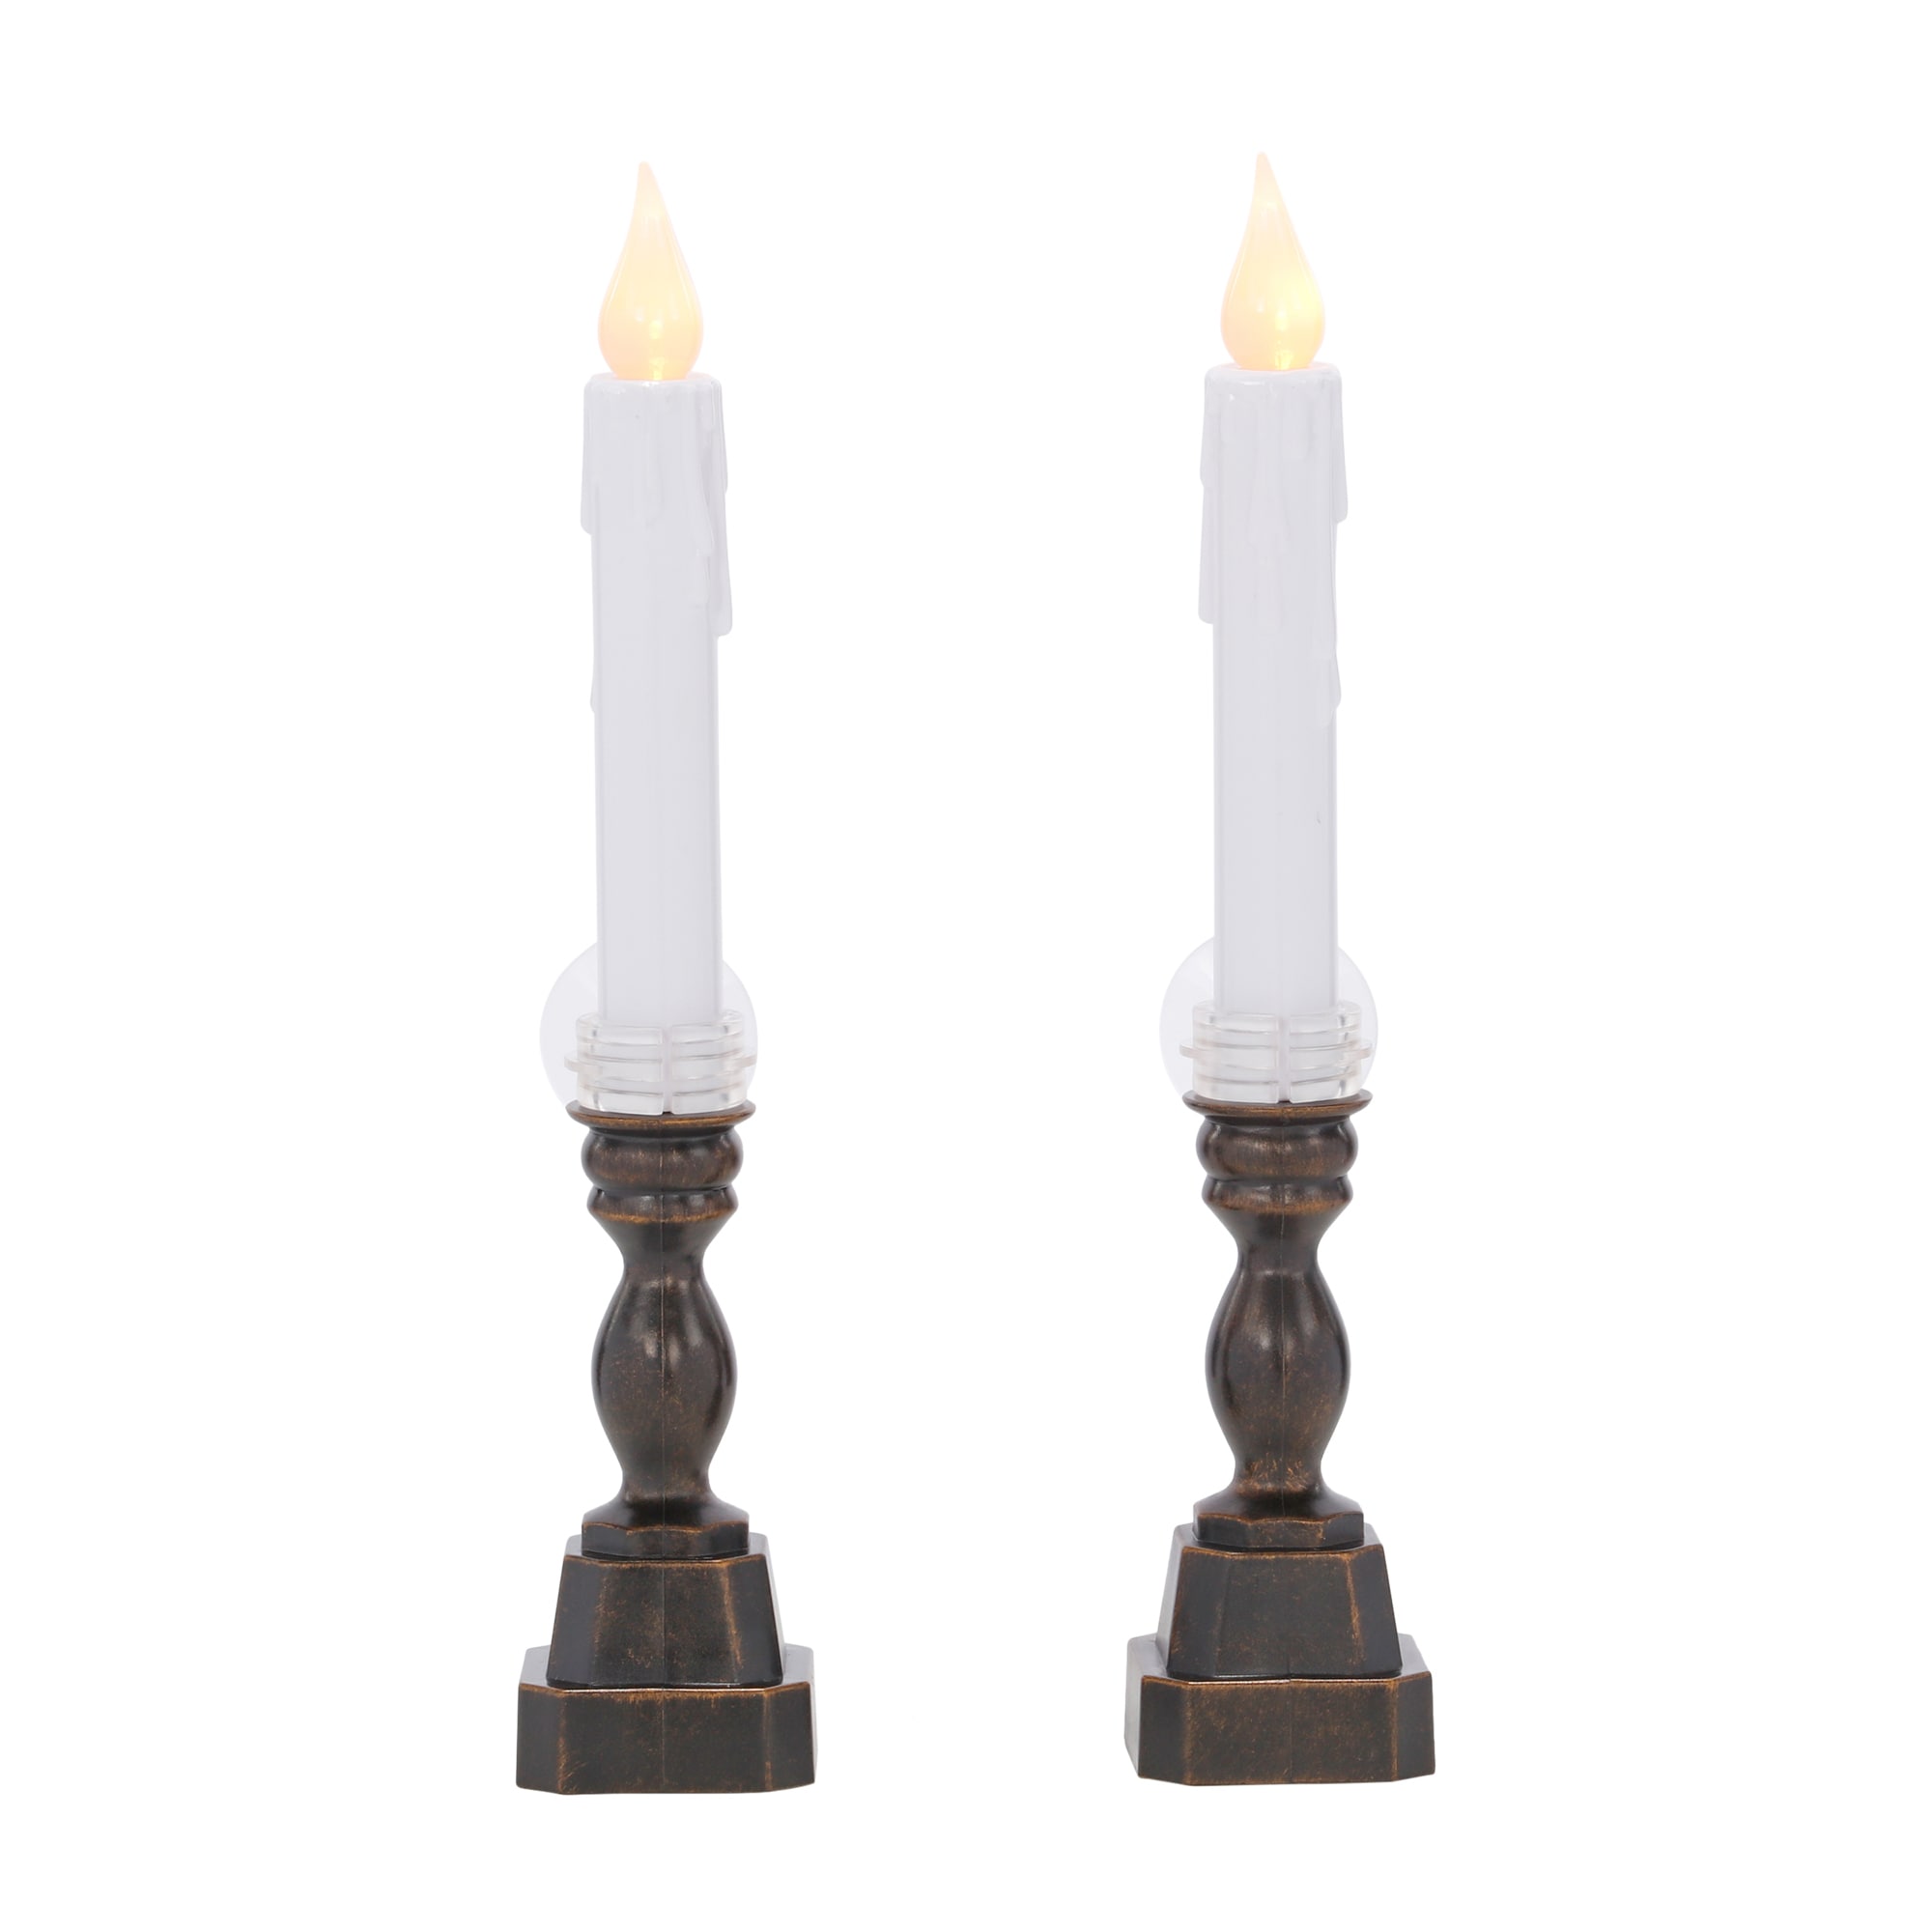 the at (2-Pack) Battery-operated Christmas Lighted in Christmas Decor 12-in Candle Decor GE department